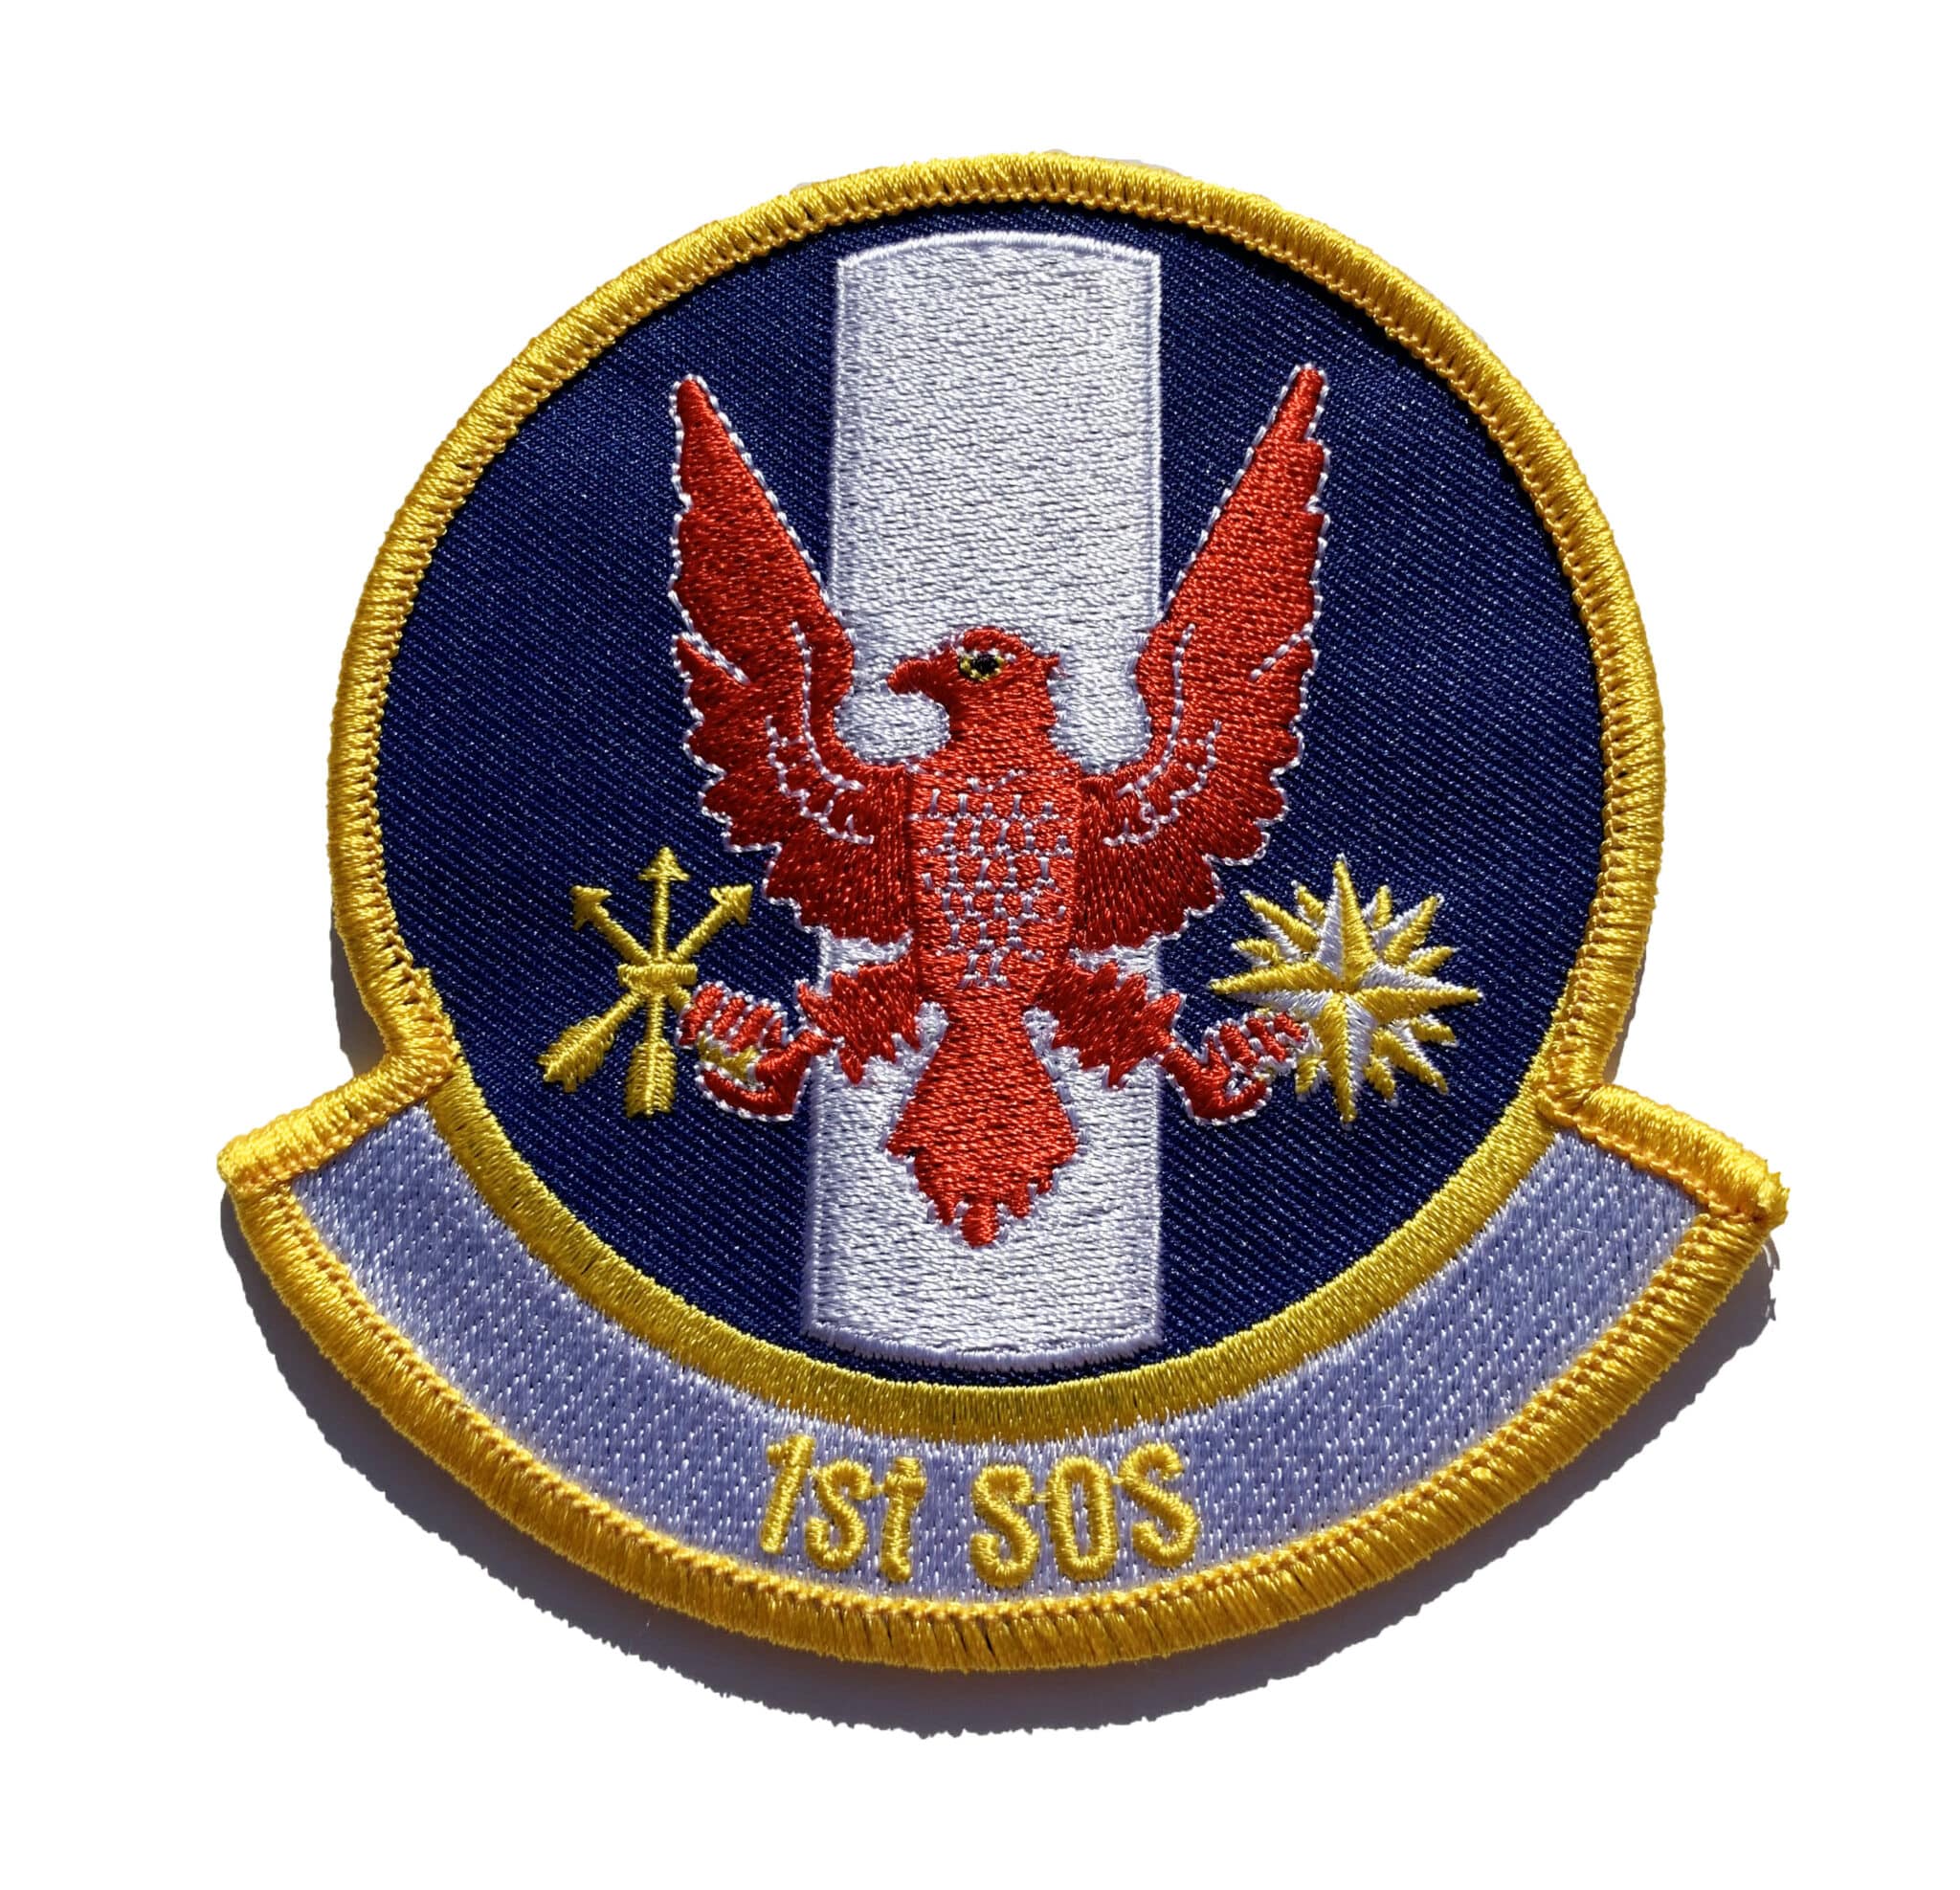 USAF 1st SOS SPECIAL OPERATIONS SQUADRON PATCH 